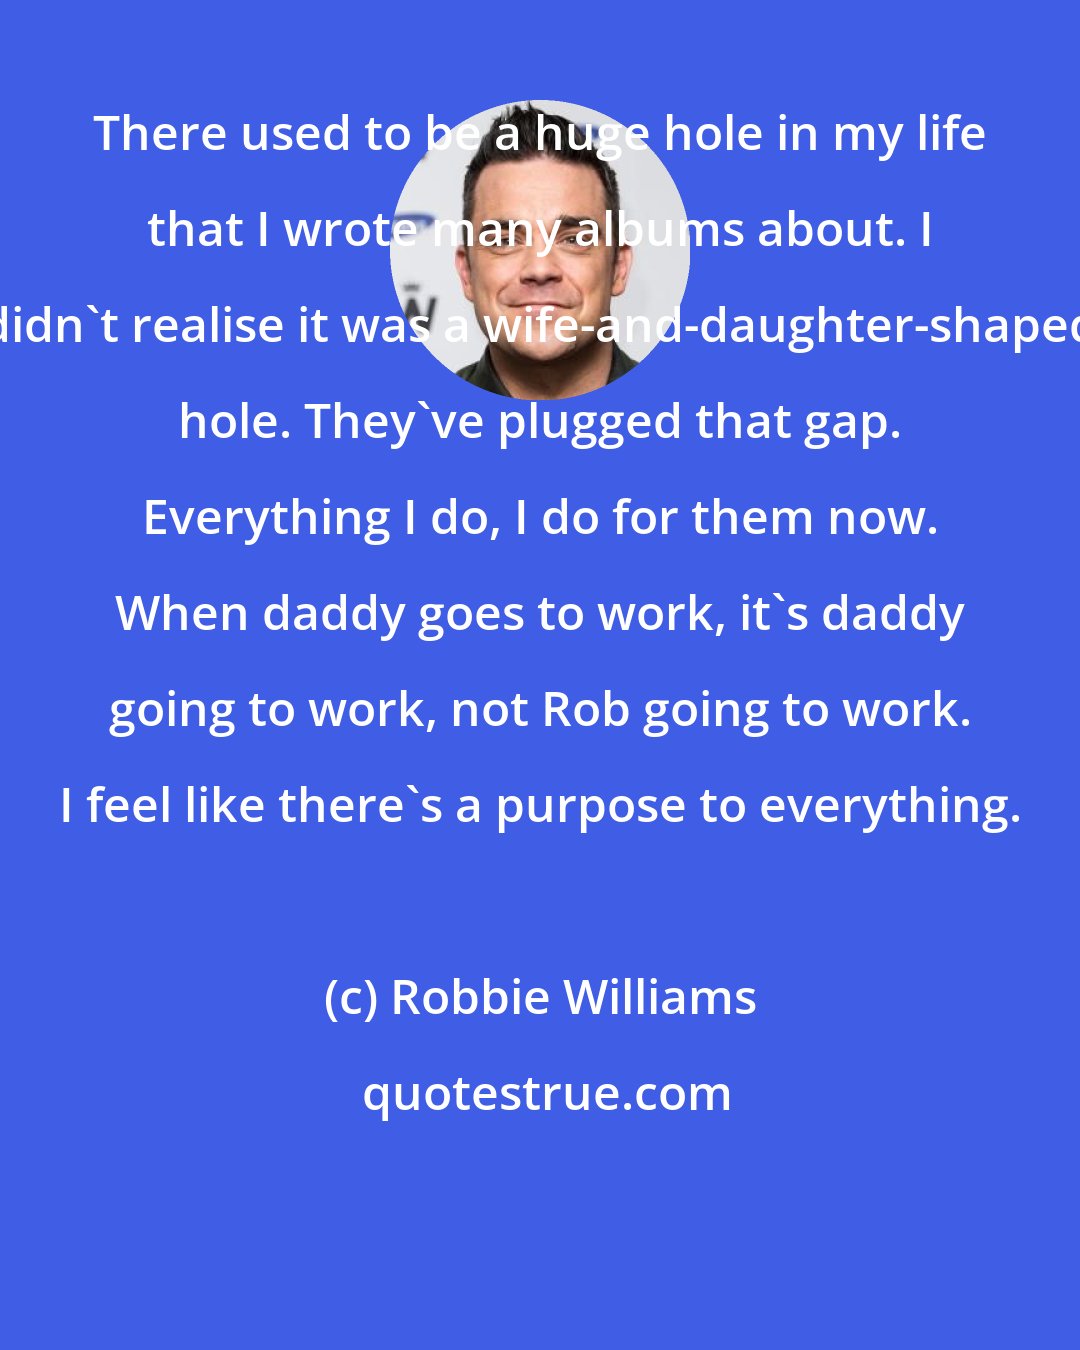 Robbie Williams: There used to be a huge hole in my life that I wrote many albums about. I didn't realise it was a wife-and-daughter-shaped hole. They've plugged that gap. Everything I do, I do for them now. When daddy goes to work, it's daddy going to work, not Rob going to work. I feel like there's a purpose to everything.